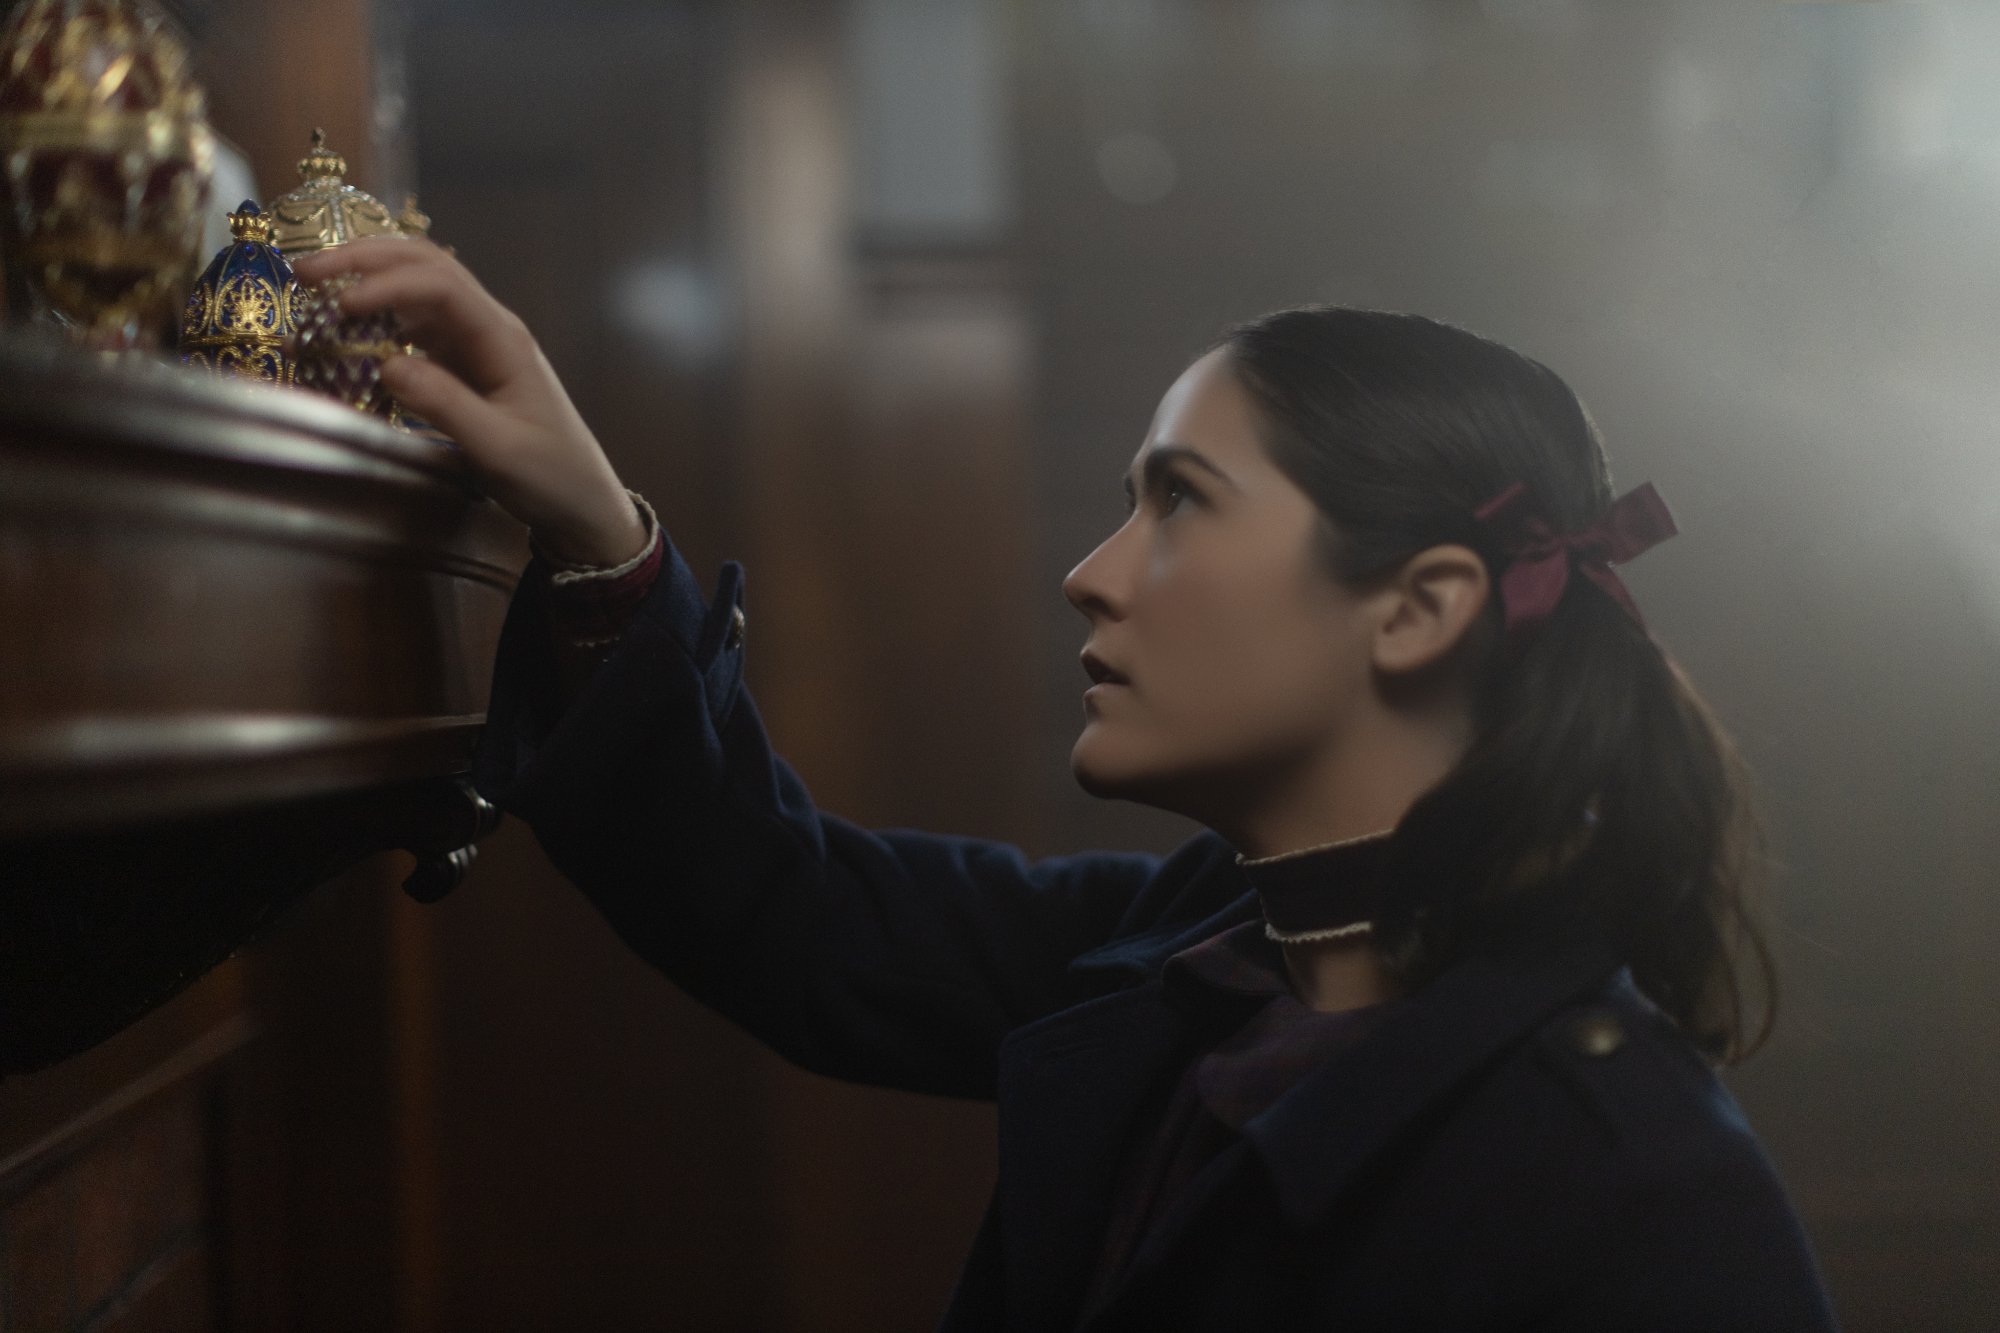 'Orphan: First Kill' Isabelle Fuhrman as Esther wearing a blue jacket with red bows in her hair. She's touching a gold ornament on a wooden mantle.